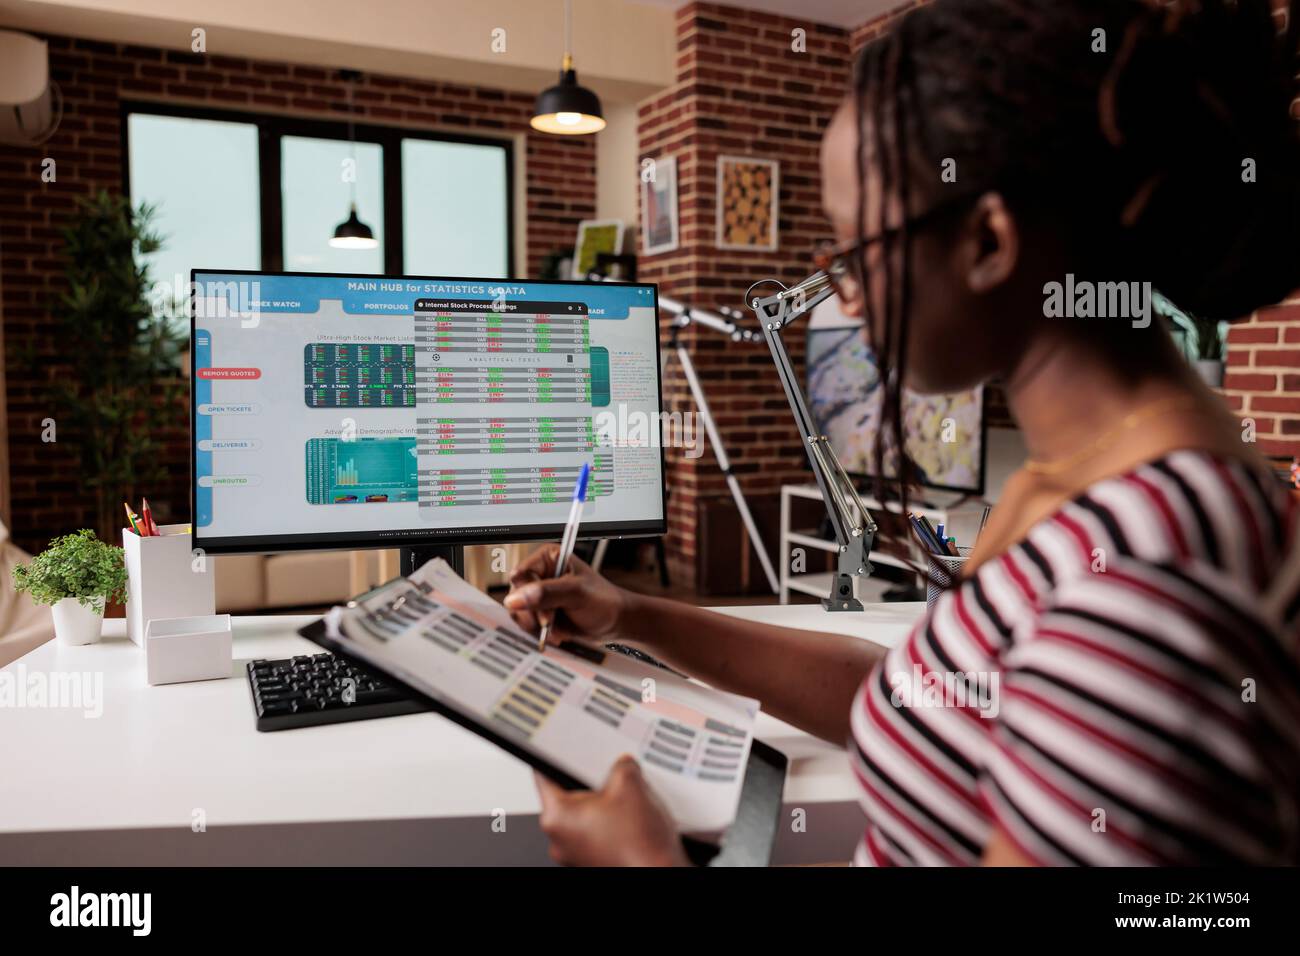 Woman analyzing statistics on computer screen, working with internet of things, using online application for work. Remote worker monitoring data, web 3 0, iot technology concept Stock Photo